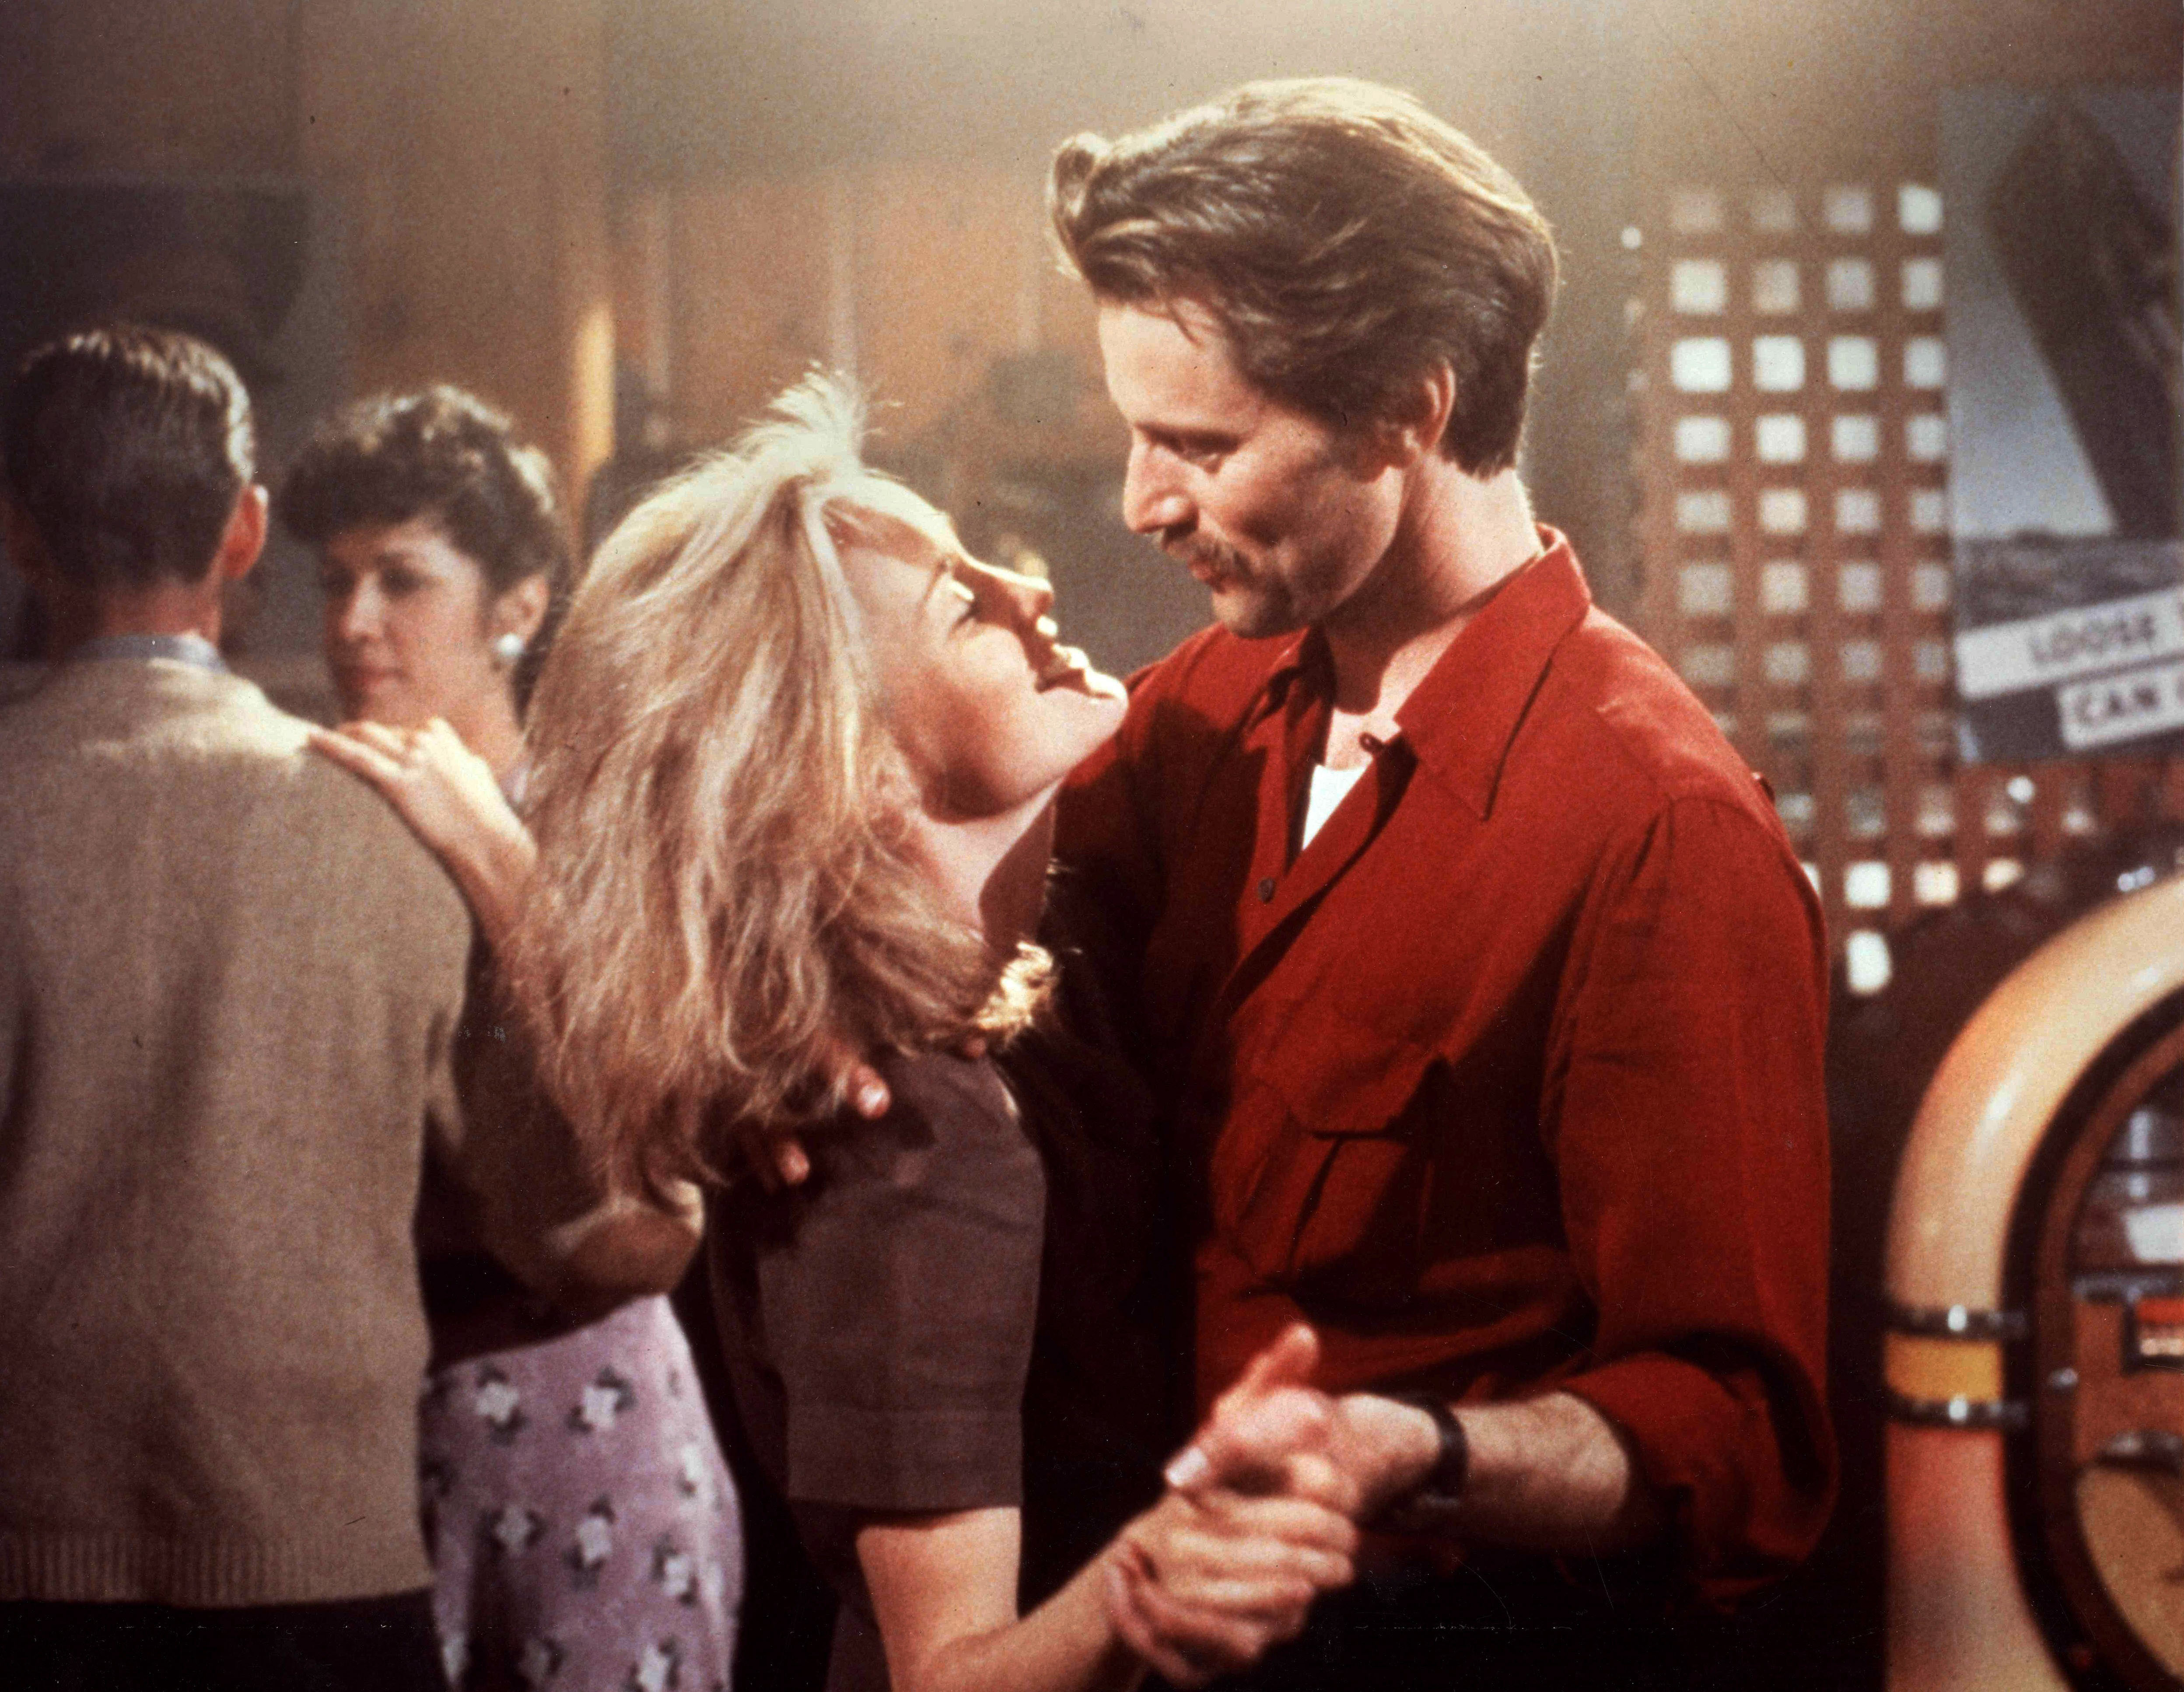 Jessica Lange and Sam Shepard pictured in a promotional still for the 1982 drama Frances